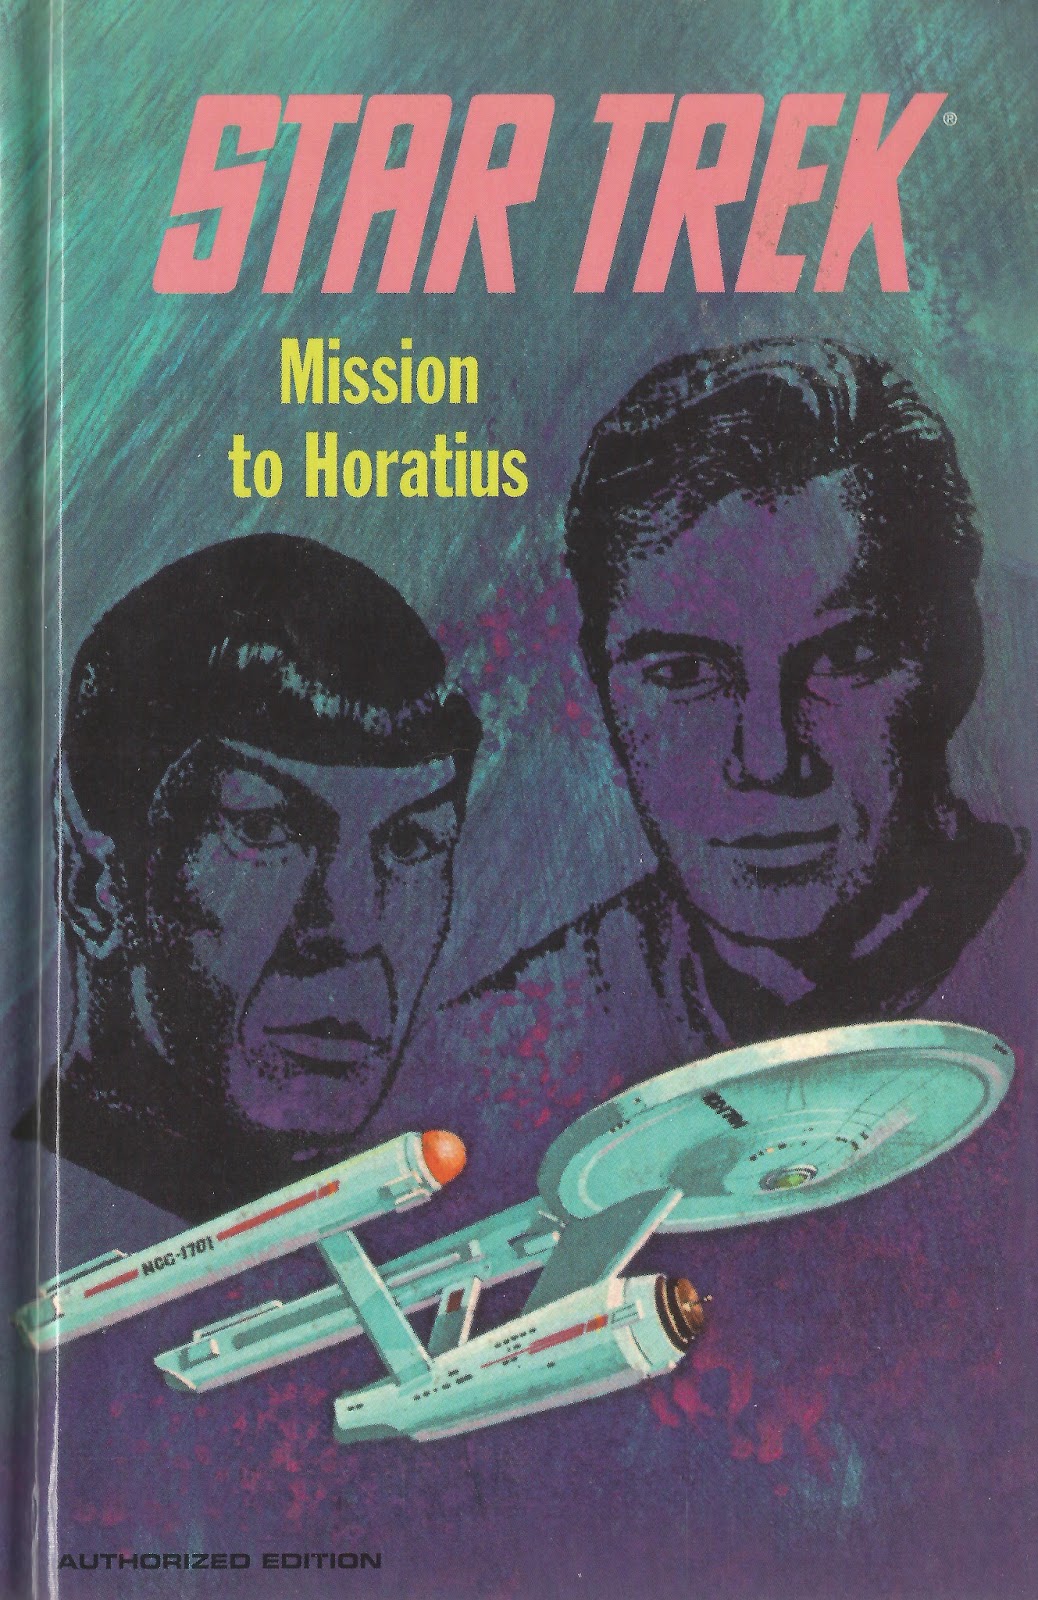 Where No Blog Has Gone Before A Review of "Star Trek Mission to